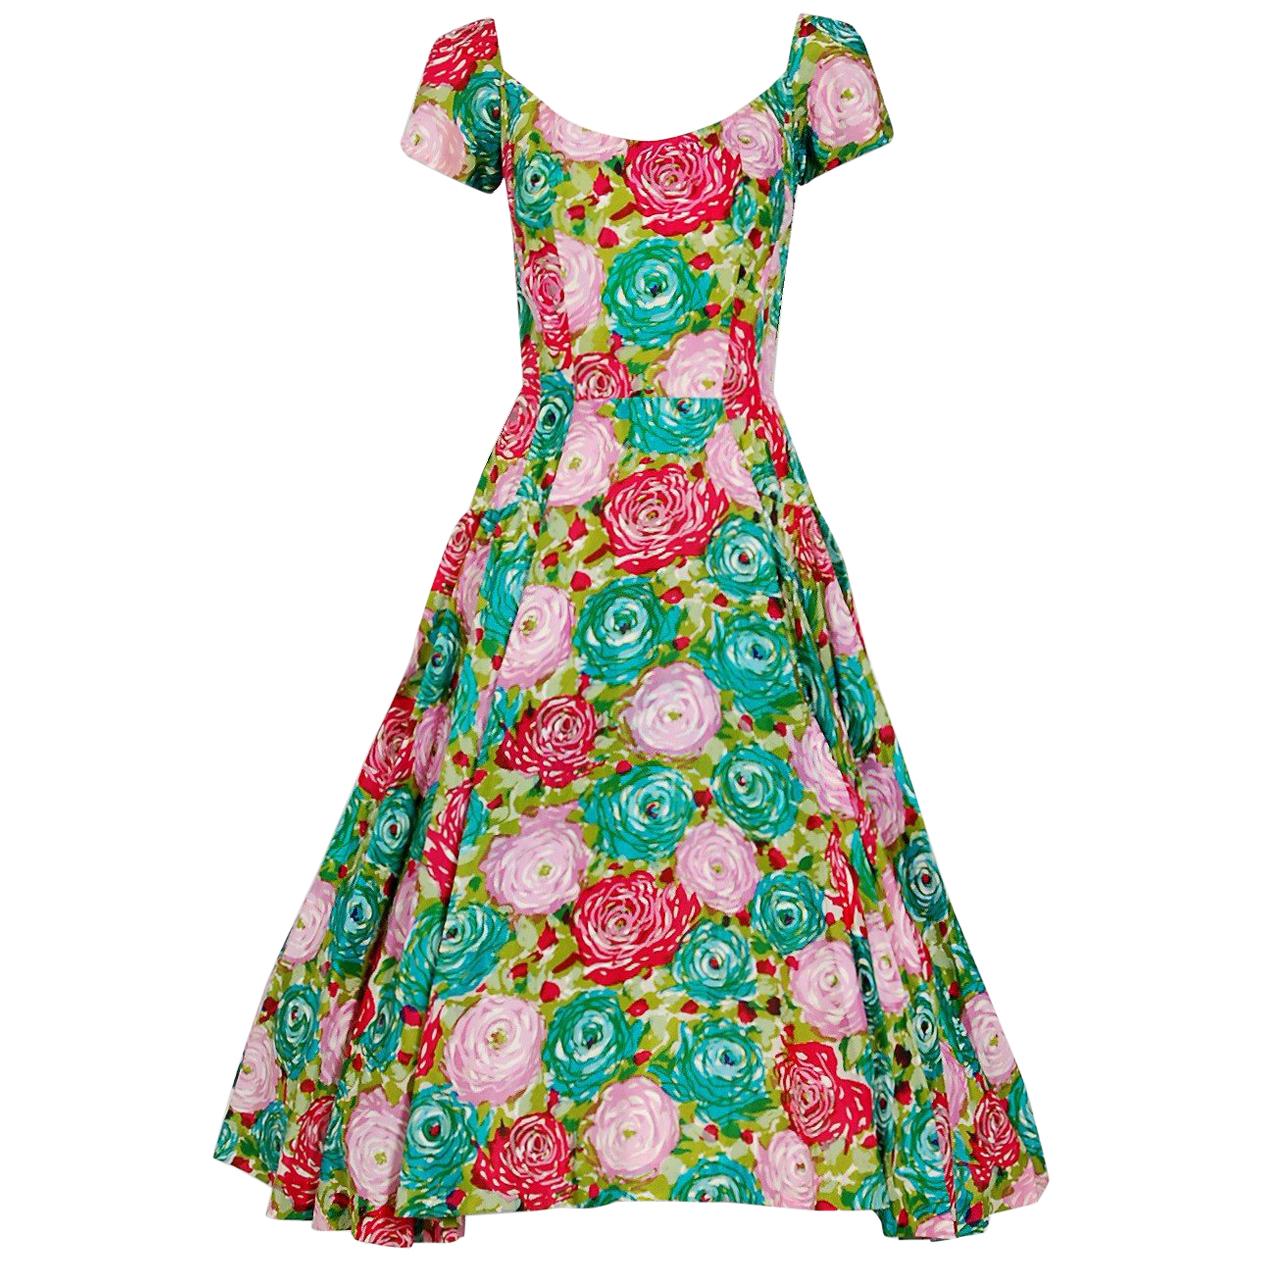 Perullo Watercolor Roses Floral Print Silk Pleated Circle Skirt Dress, 1950s 